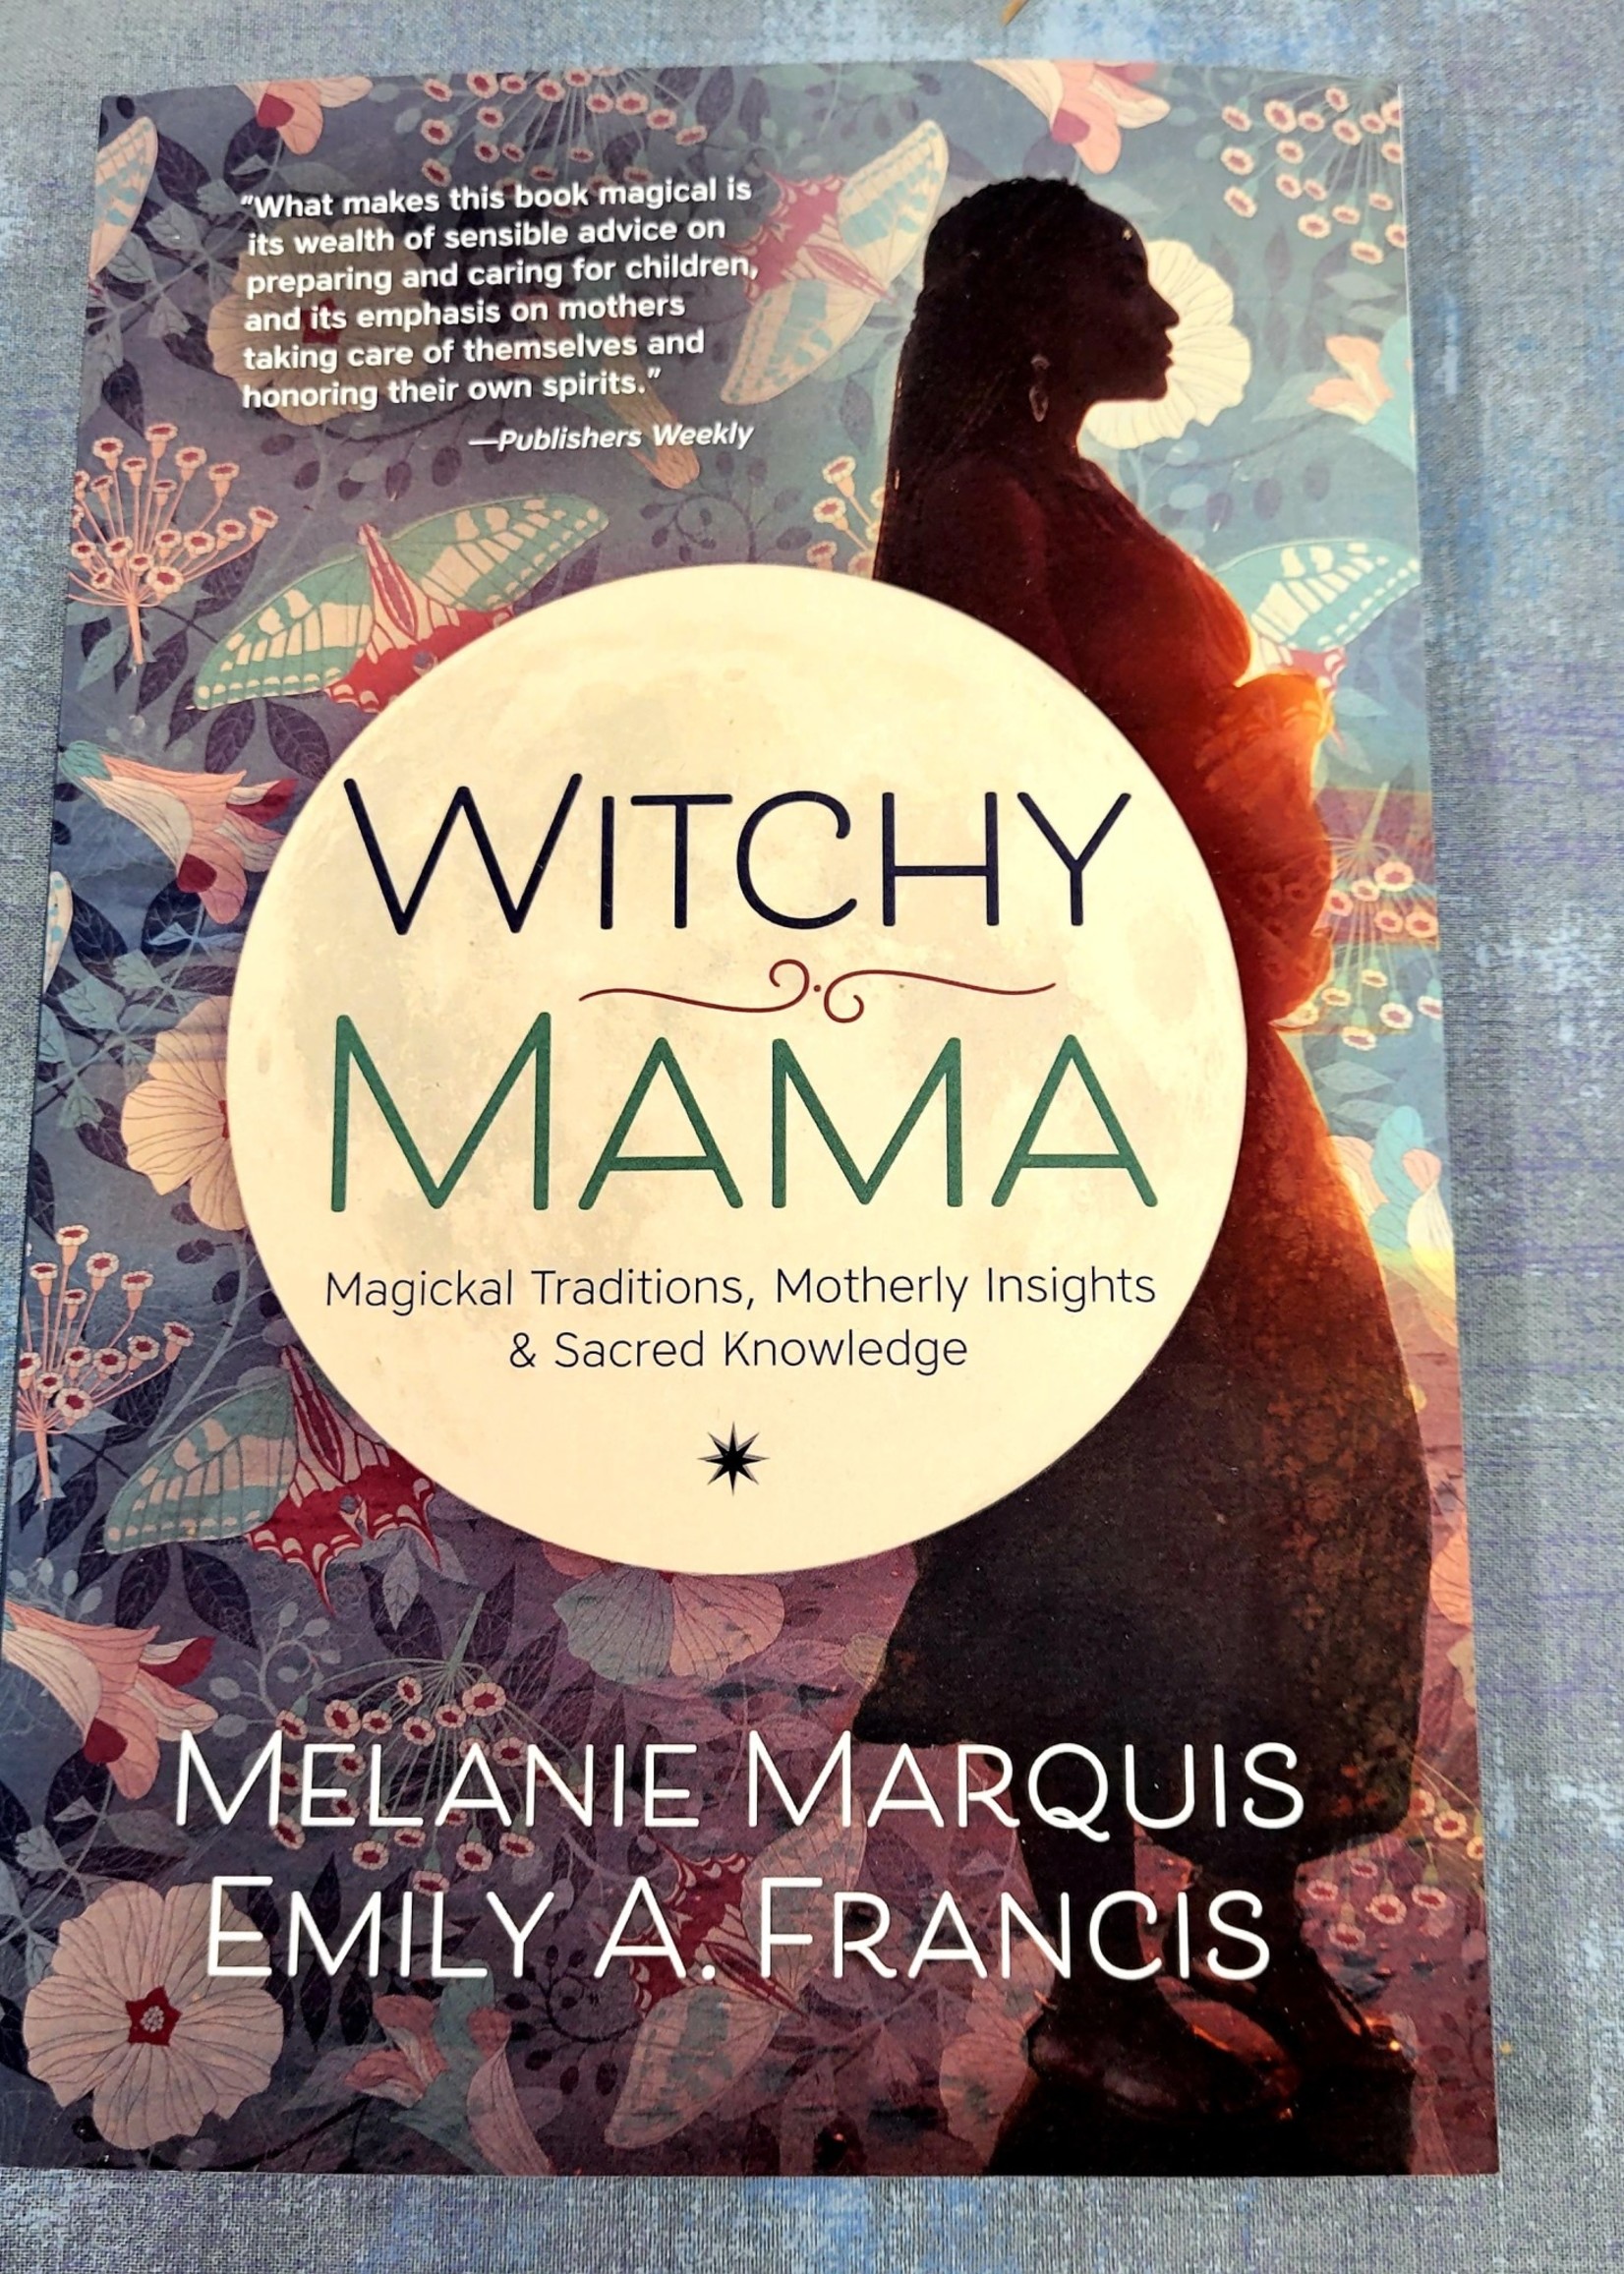 Witchy Mama - BY MELANIE MARQUIS, EMILY A. FRANCIS